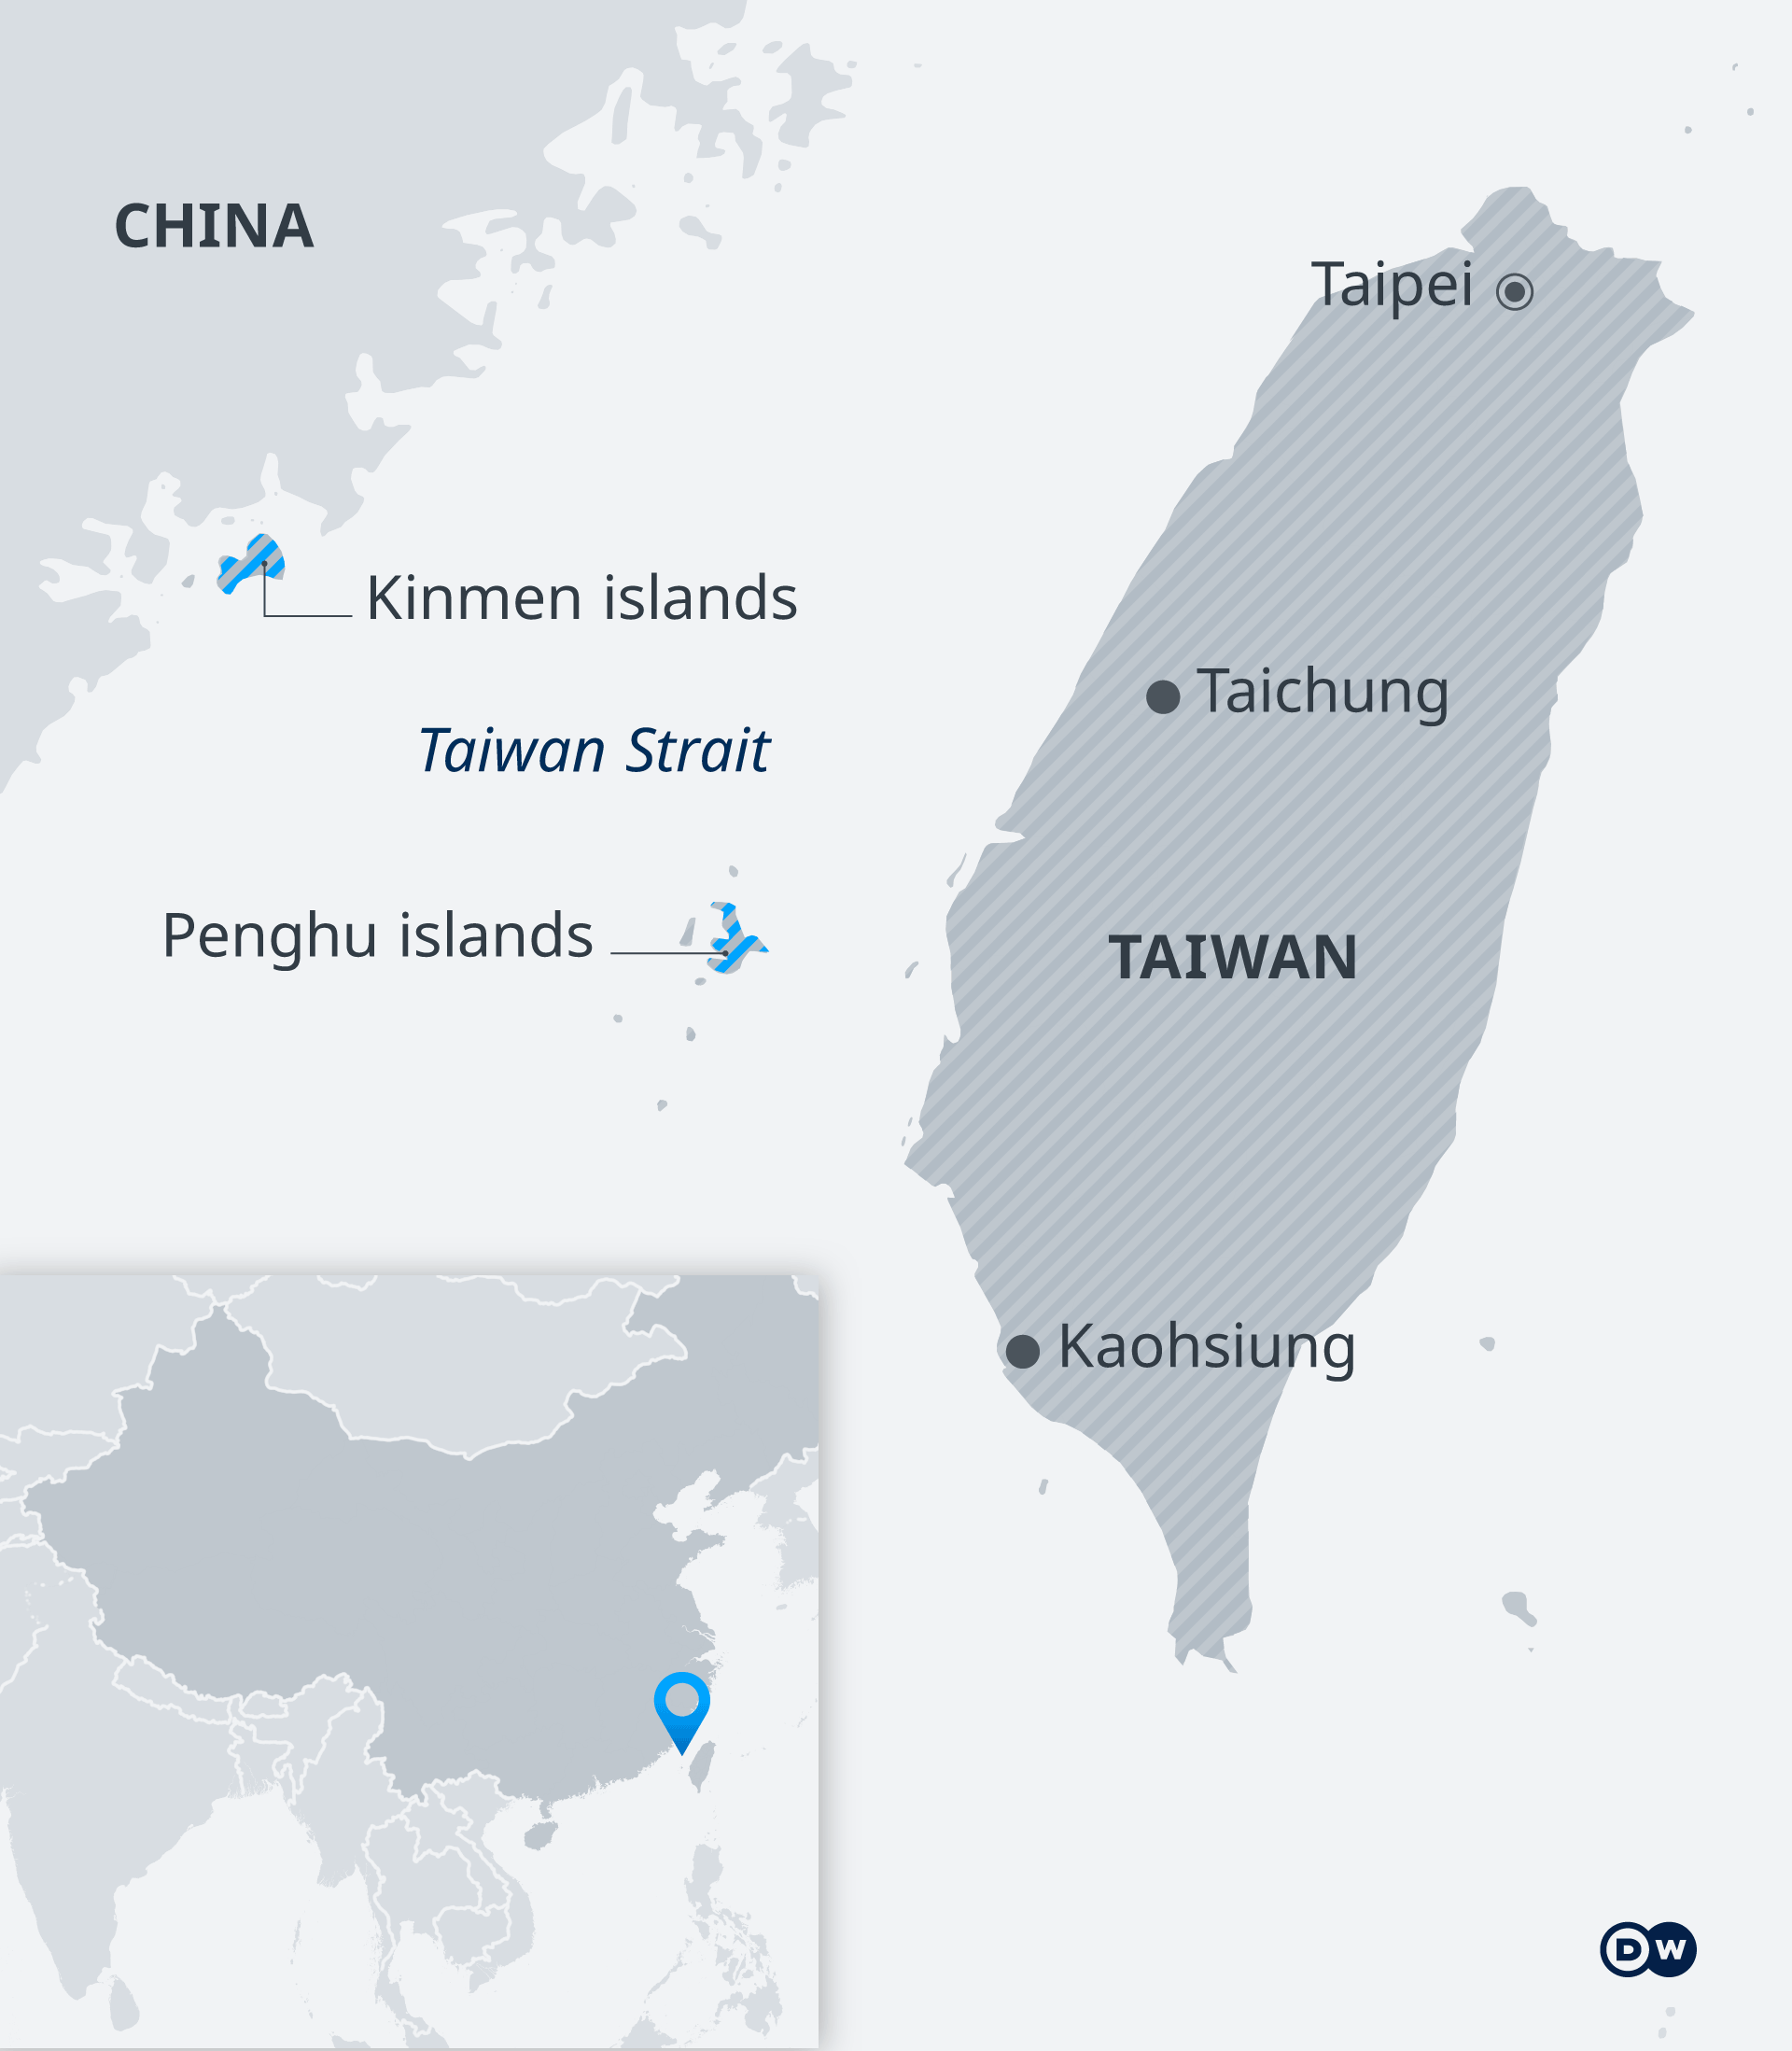 A map of the Taiwan Strait, showing the island of Taiwan and the eastern coast of China